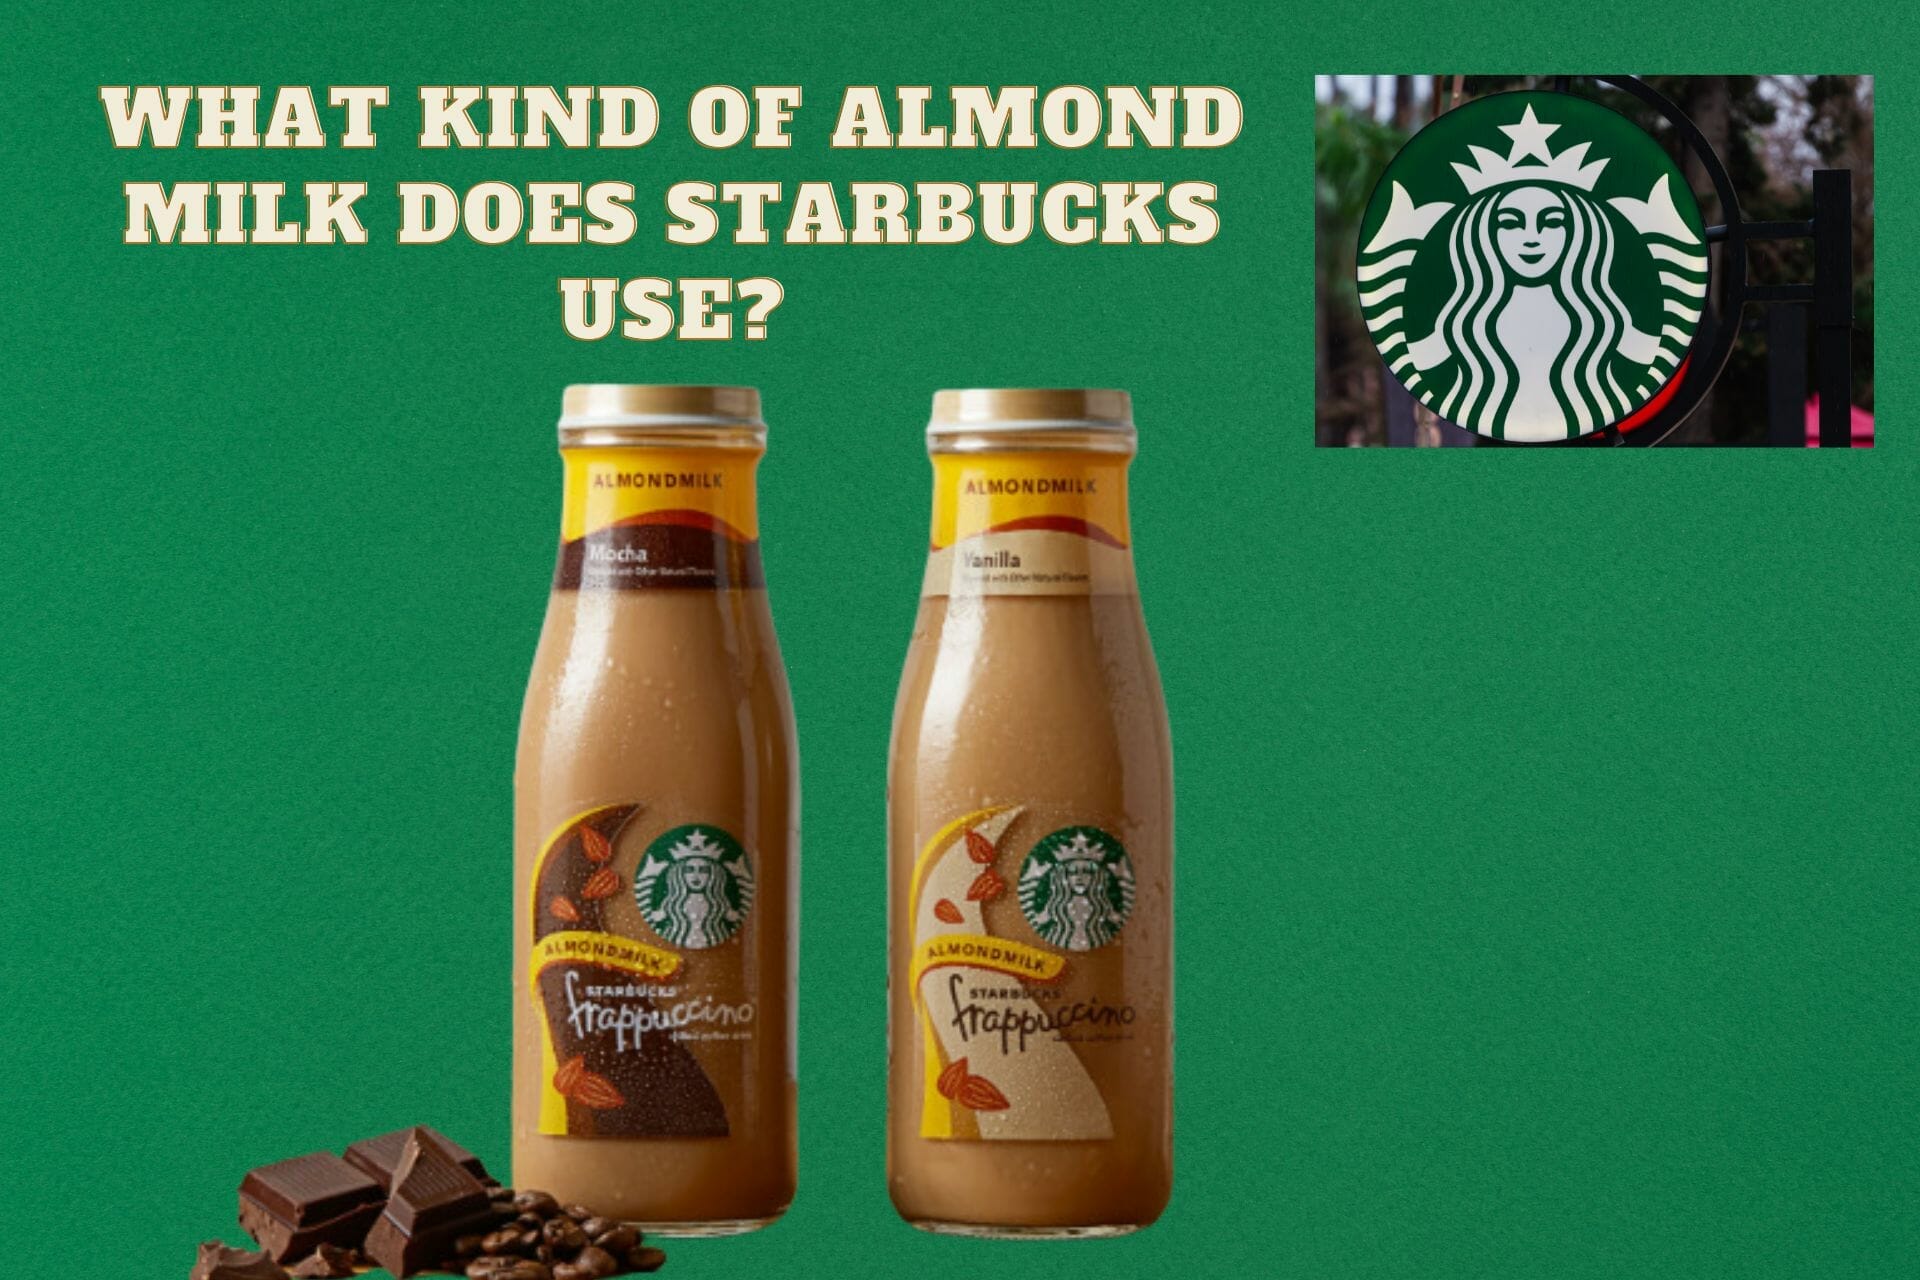 What kind of Almond milk does starbucks use